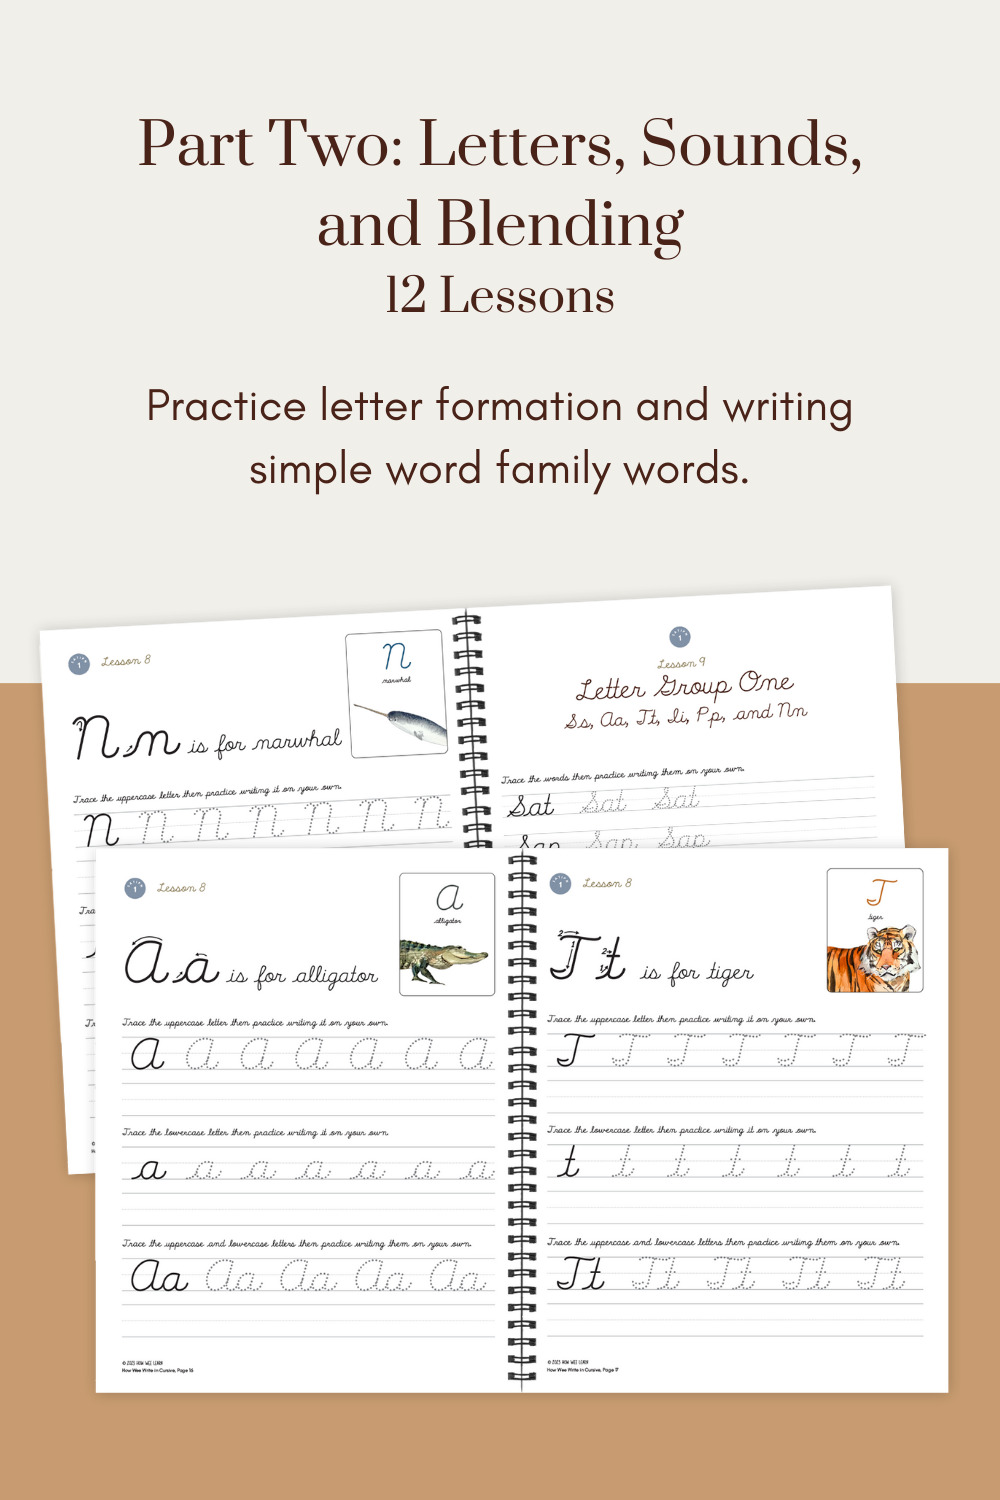 Part Two: Letters, Sounds, and Blending (12 Lessons). Practice letter formation and writing simple word family words.